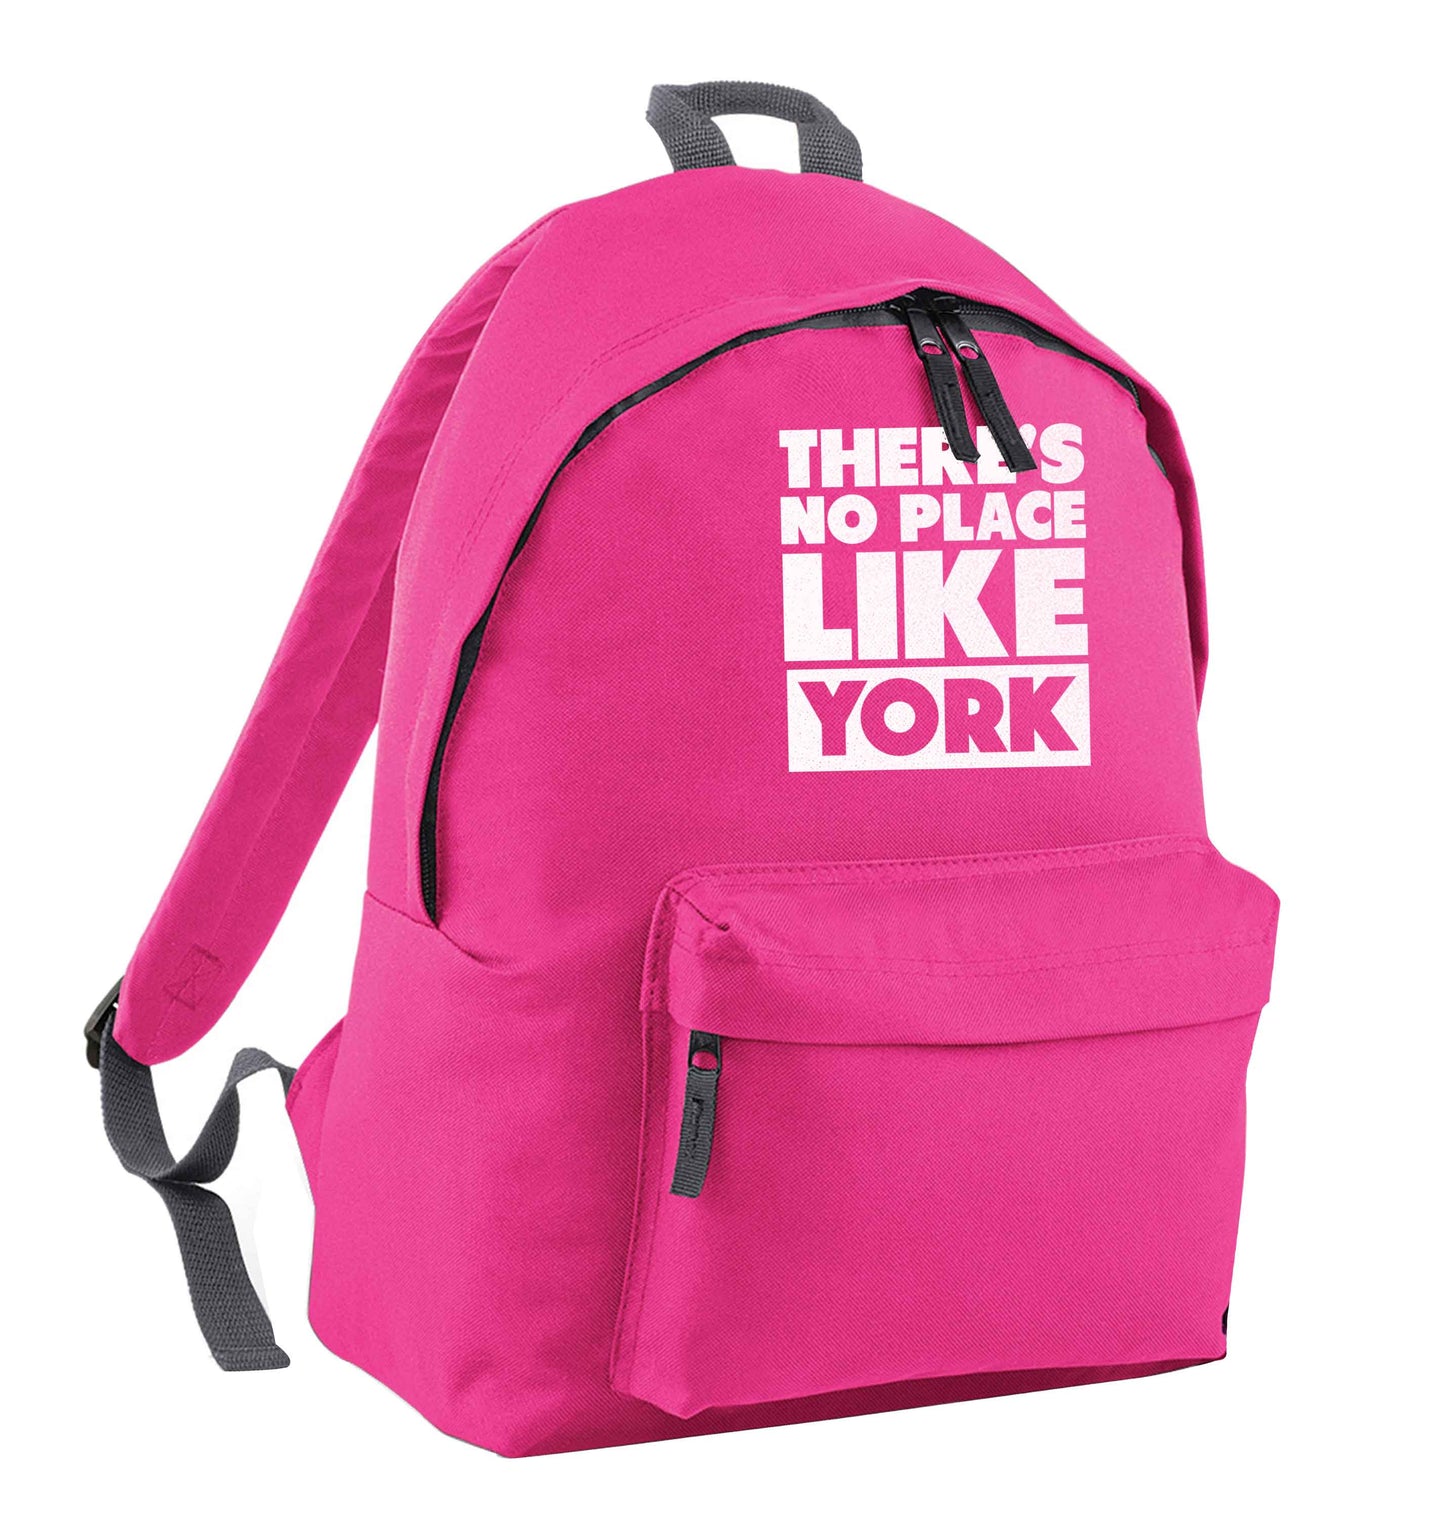 There's no place like york pink children's backpack